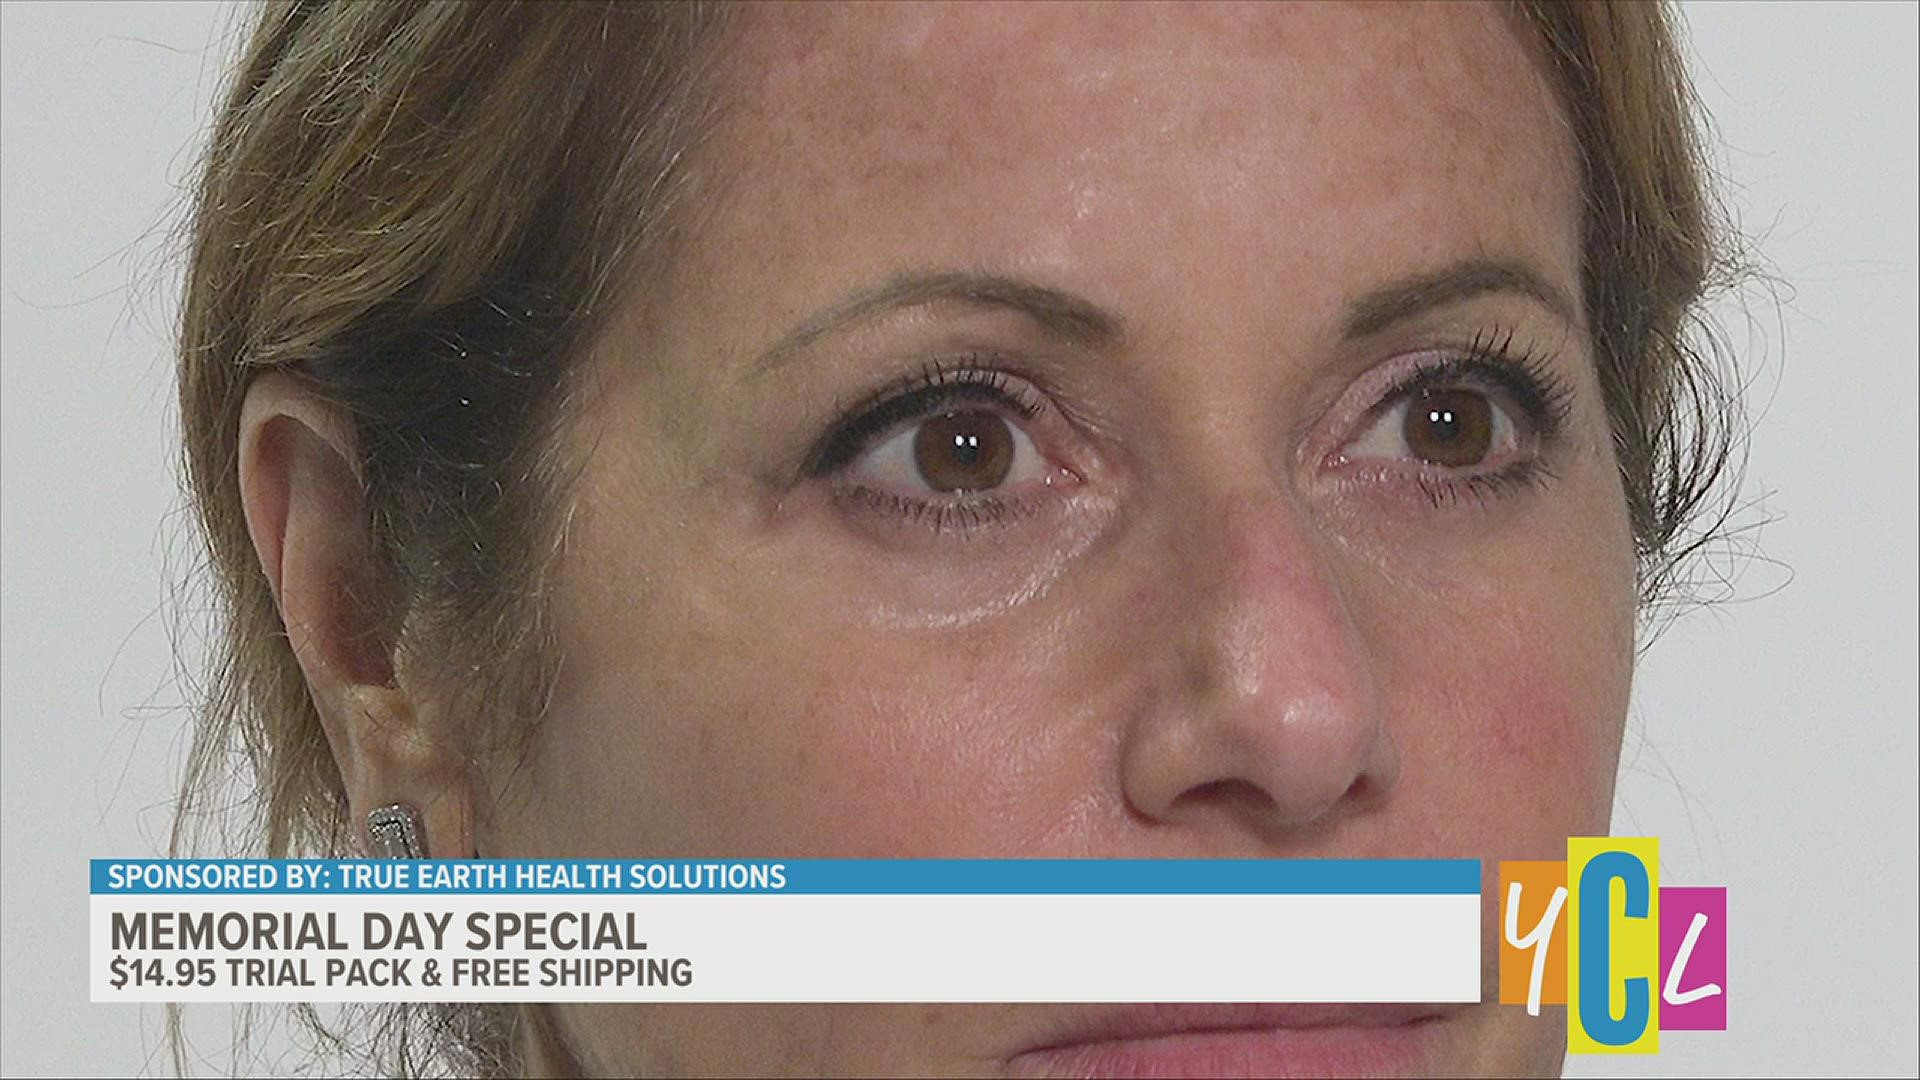 Boost your appearance and look refreshed and vibrant in minutes. This segment paid for by True Earth Health Solutions.